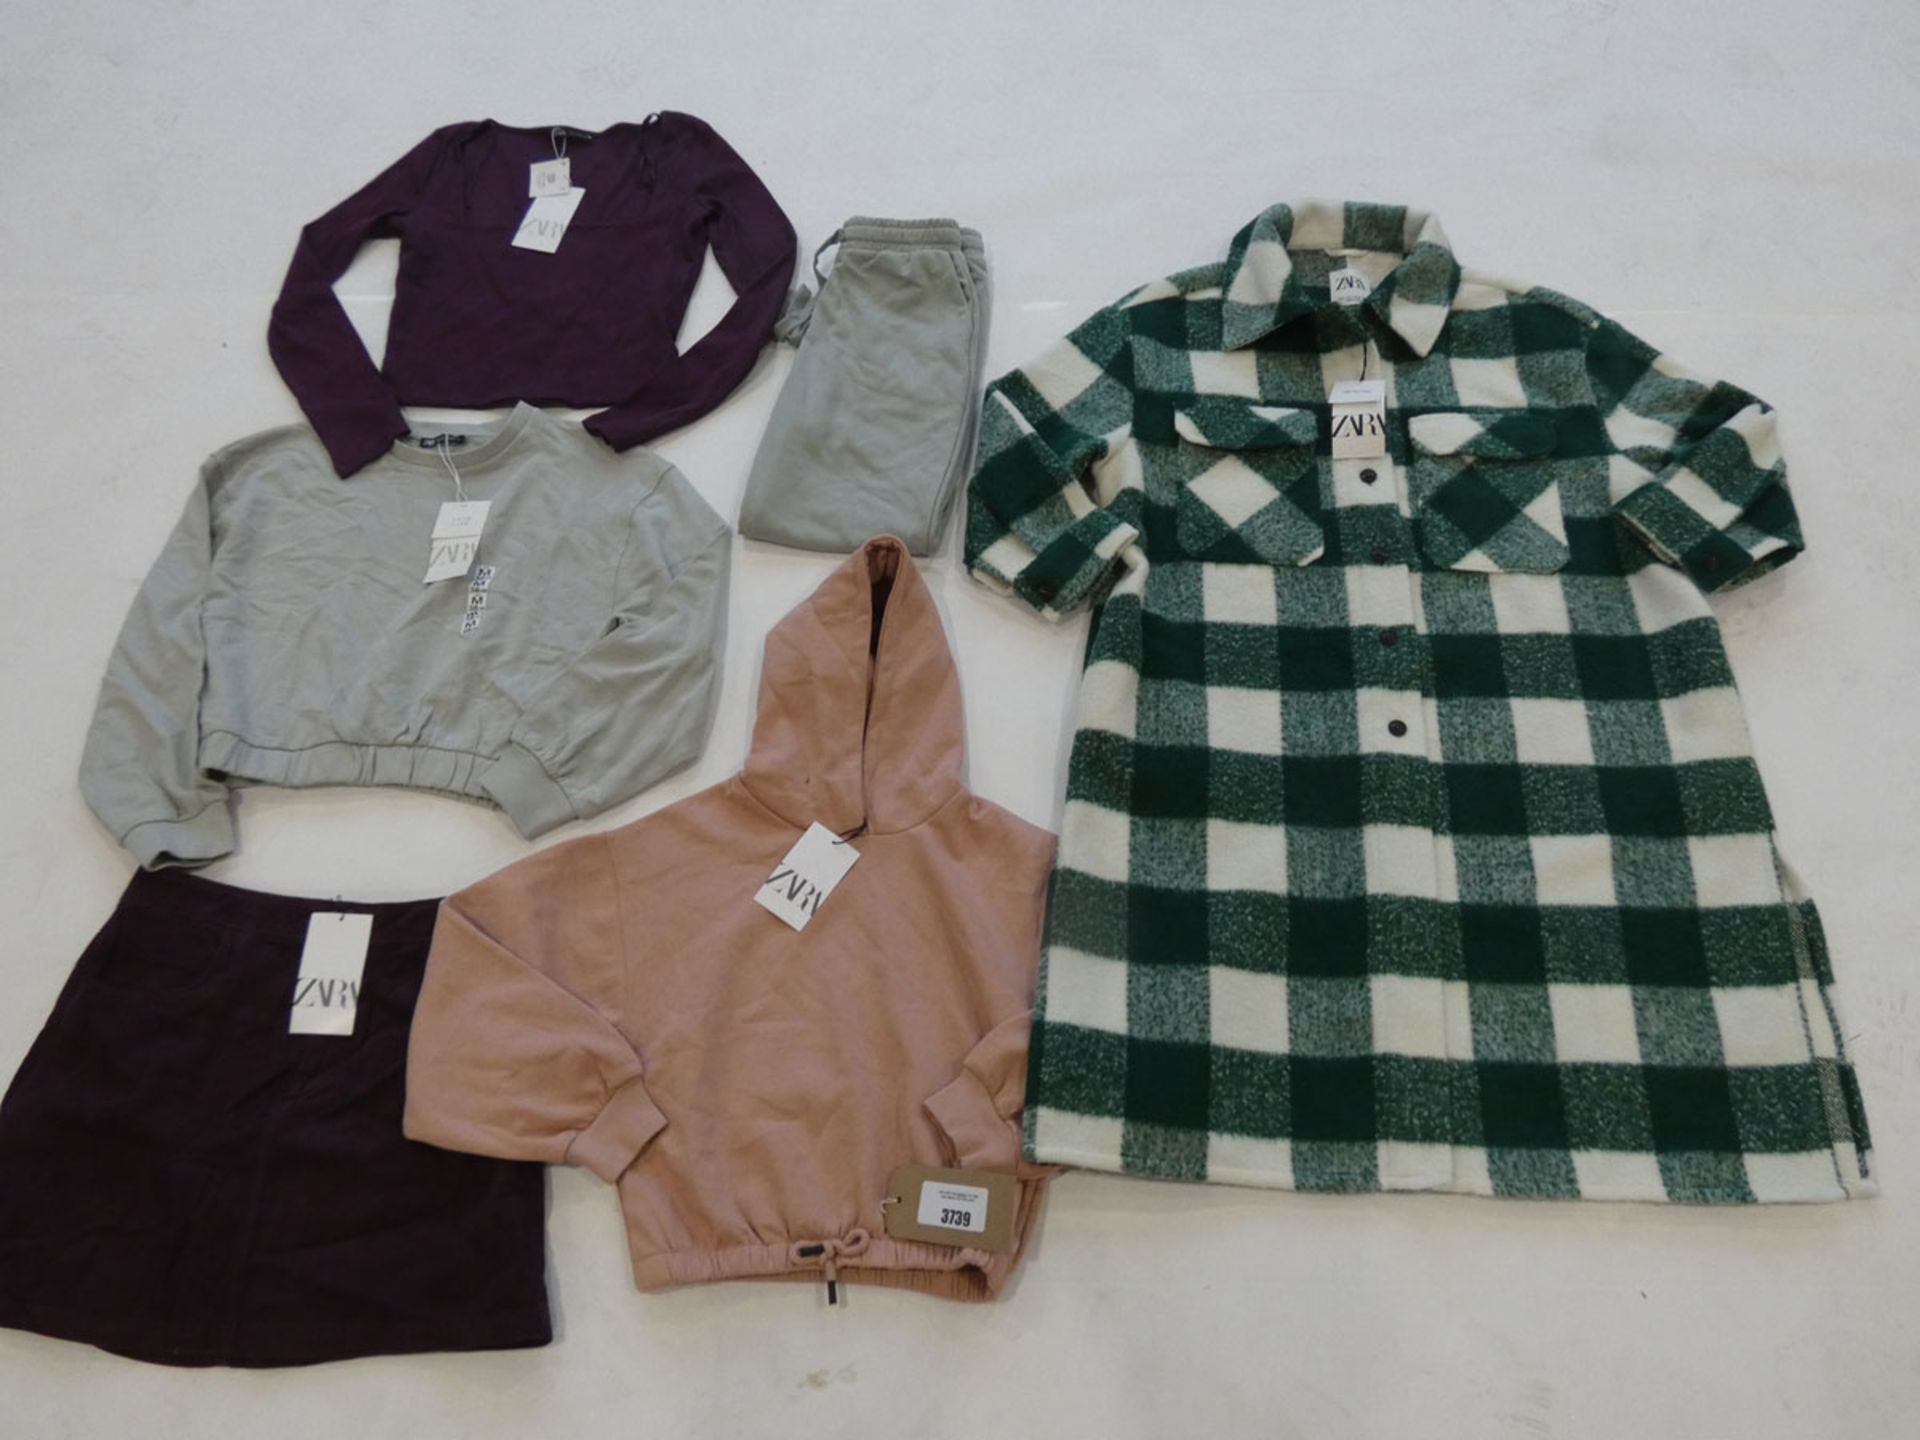 Selection of Zara clothing to include coat, tops, skirts & joggers - sizes M-L